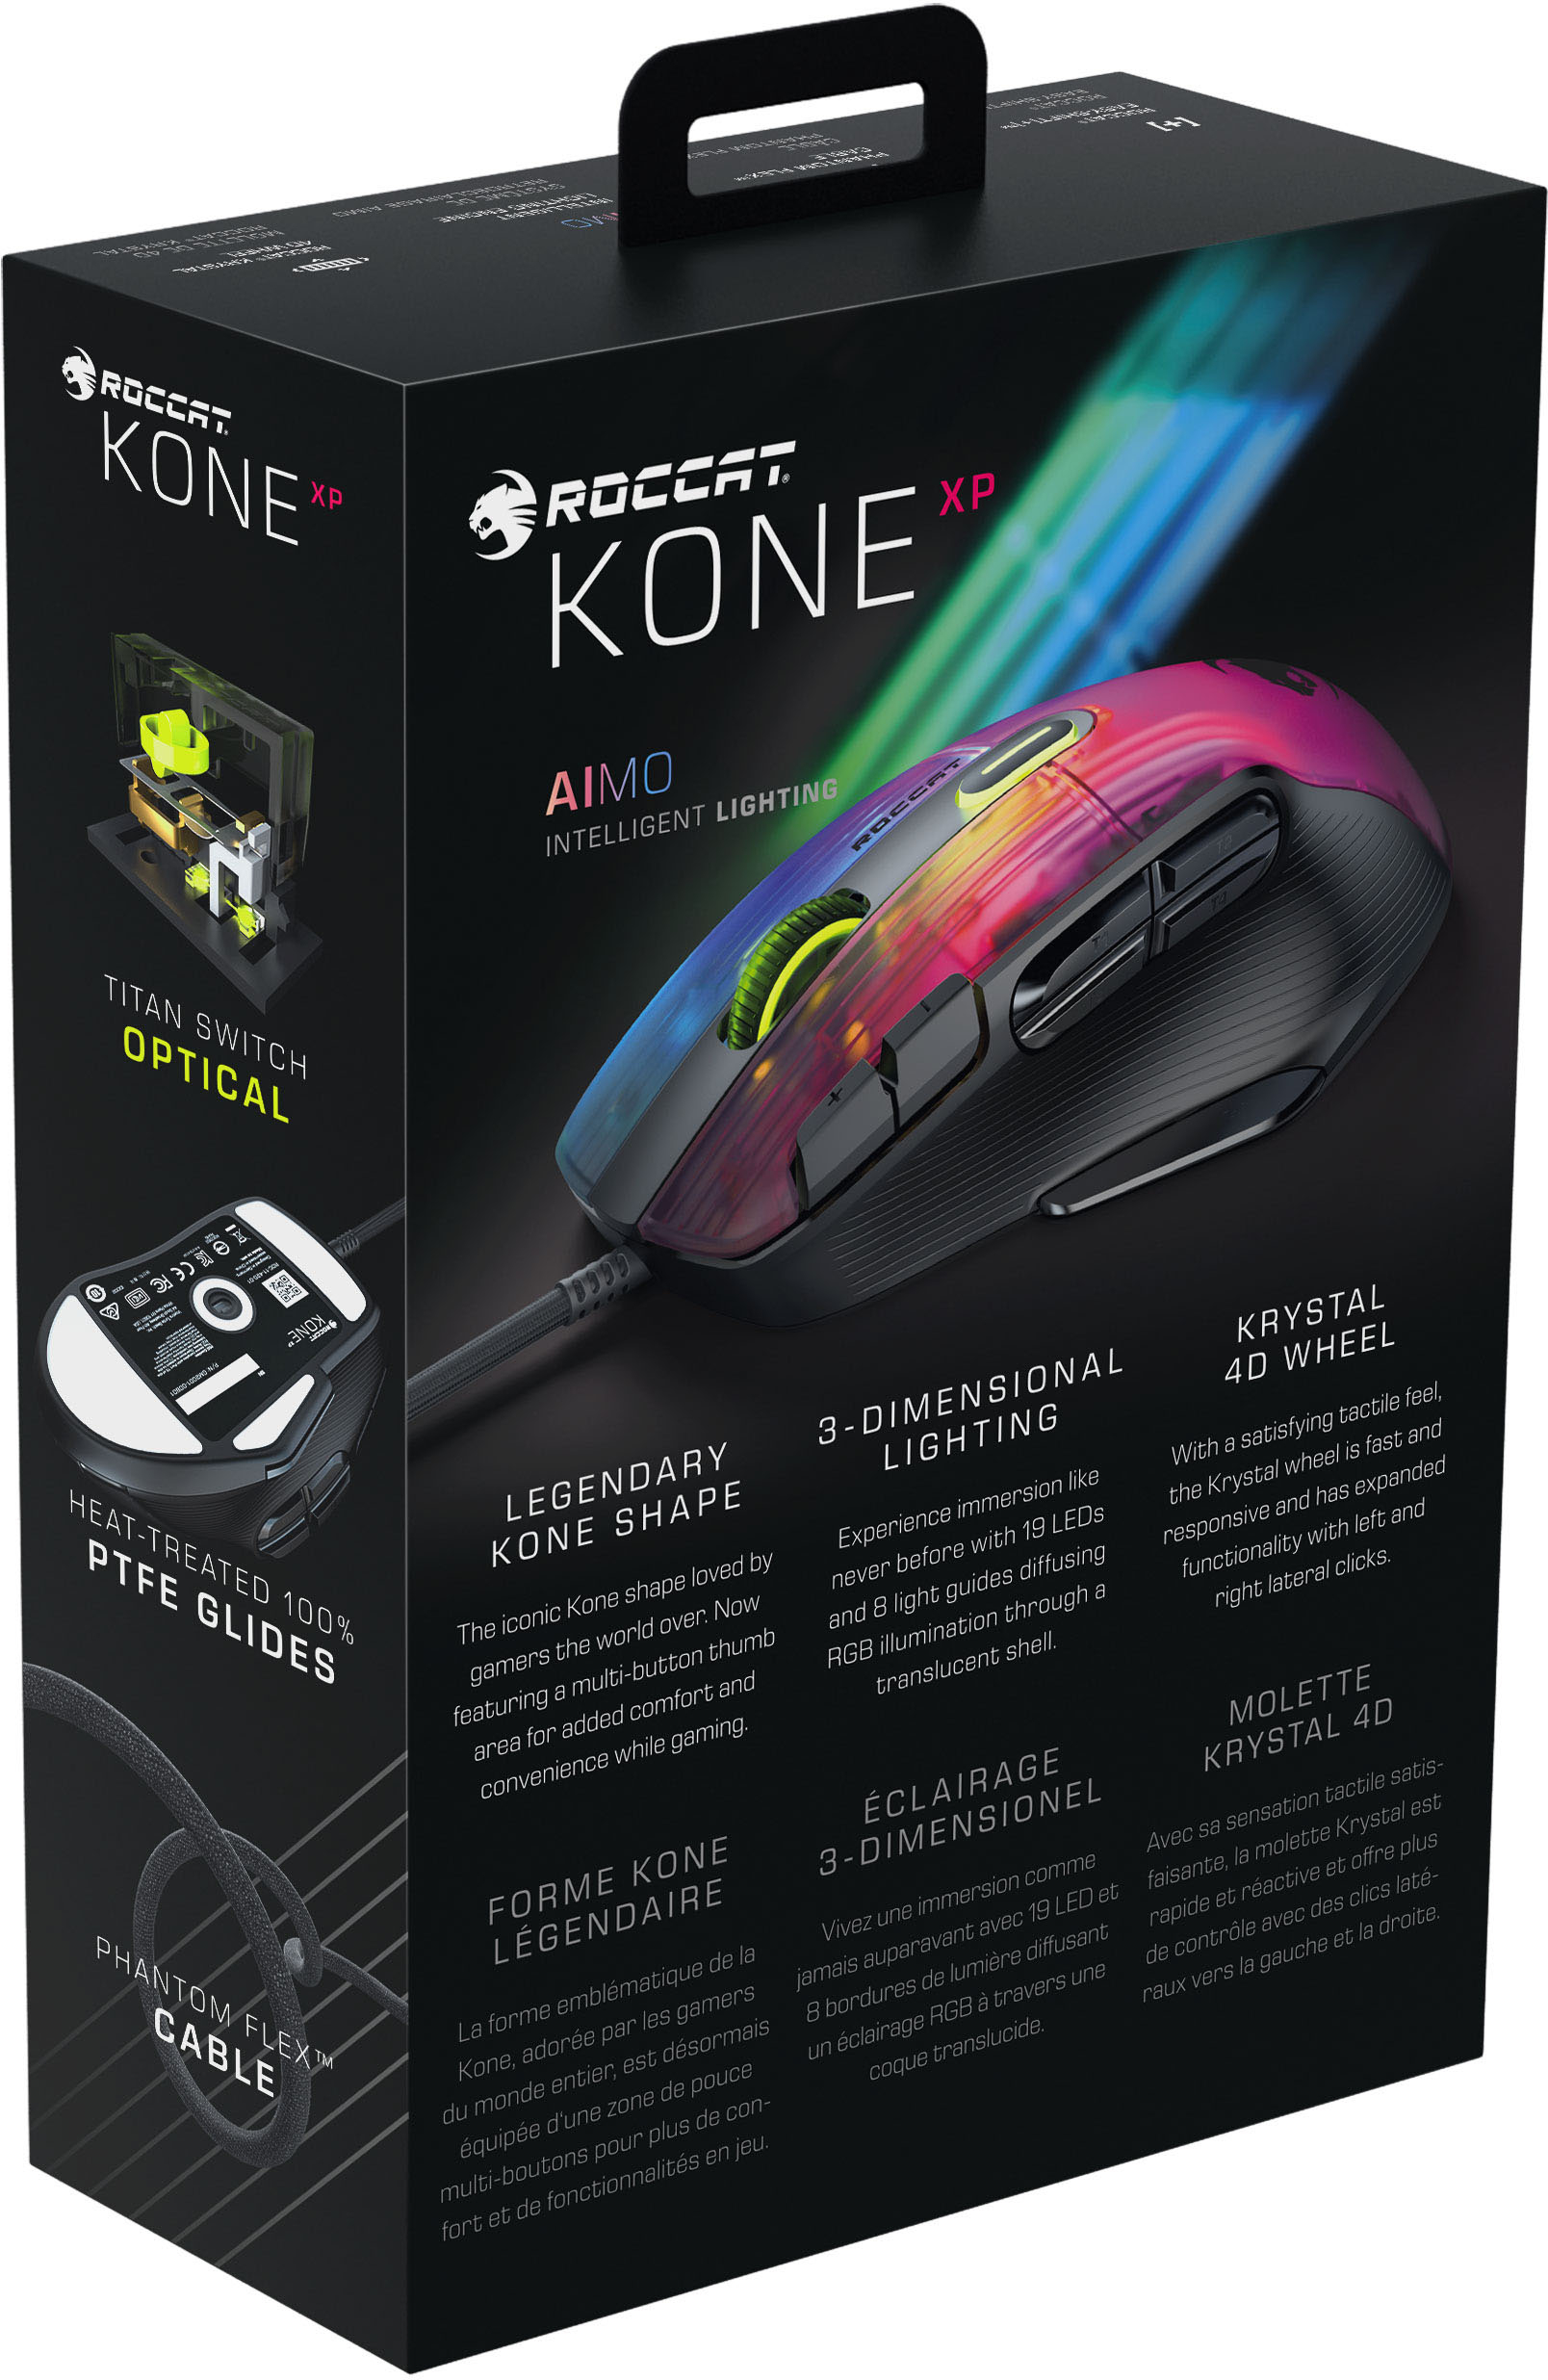 Mouse & lighting Buy AIMO design multi-button Ambidextrous Black with ROC-11-420-01 Optical RGB ROCCAT Gaming - Kone Best XP Wired